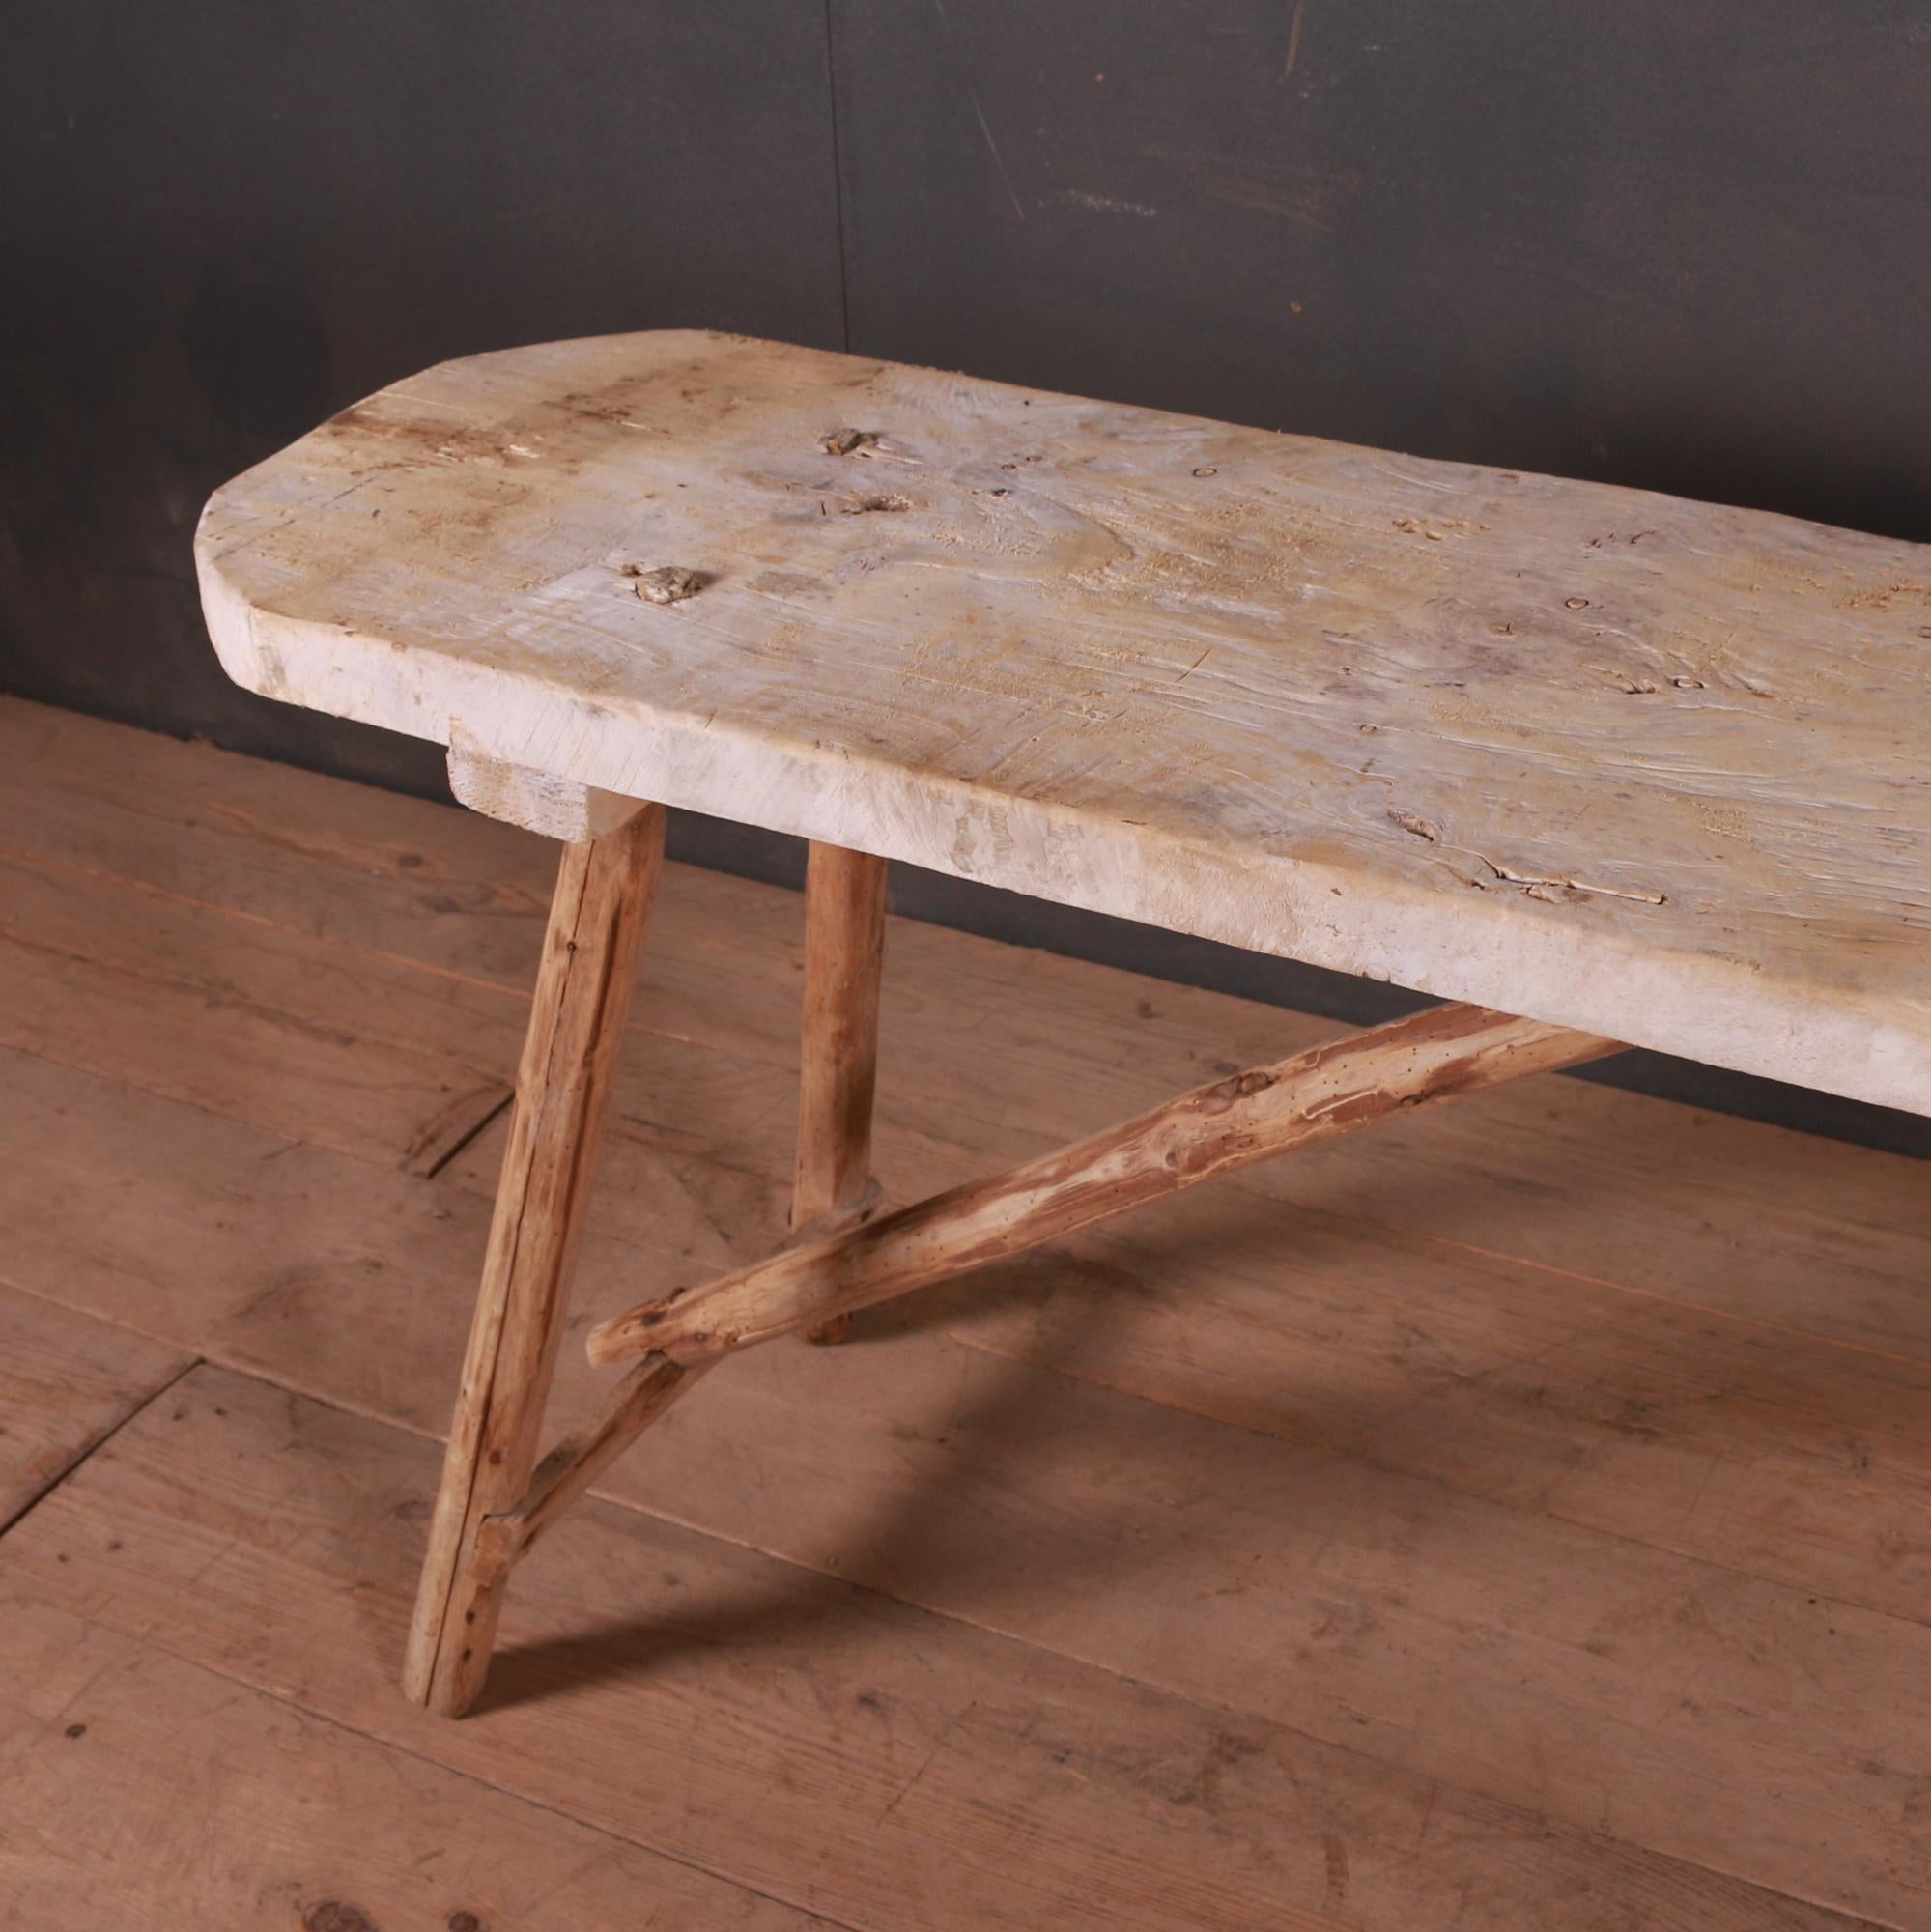 Interesting 19th C French scrubbed poplar and oak trestle table. 1880.

Depth of top is 15